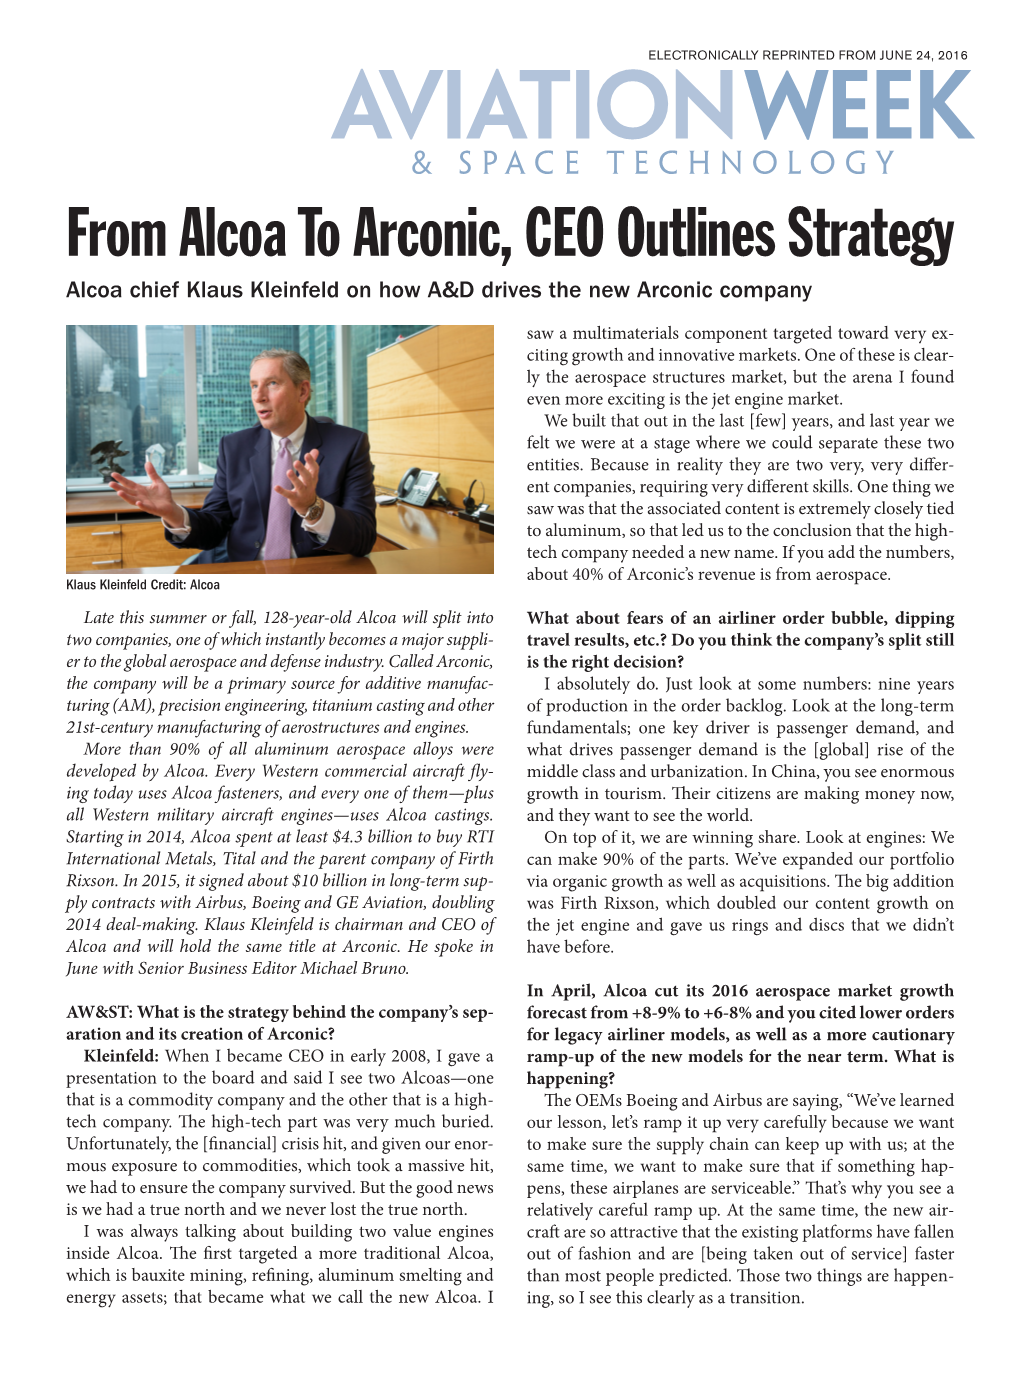 AVIATIONWEEK & SPACE TECHNOLOGY from Alcoa to Arconic, CEO Outlines Strategy Alcoa Chief Klaus Kleinfeld on How A&D Drives the New Arconic Company